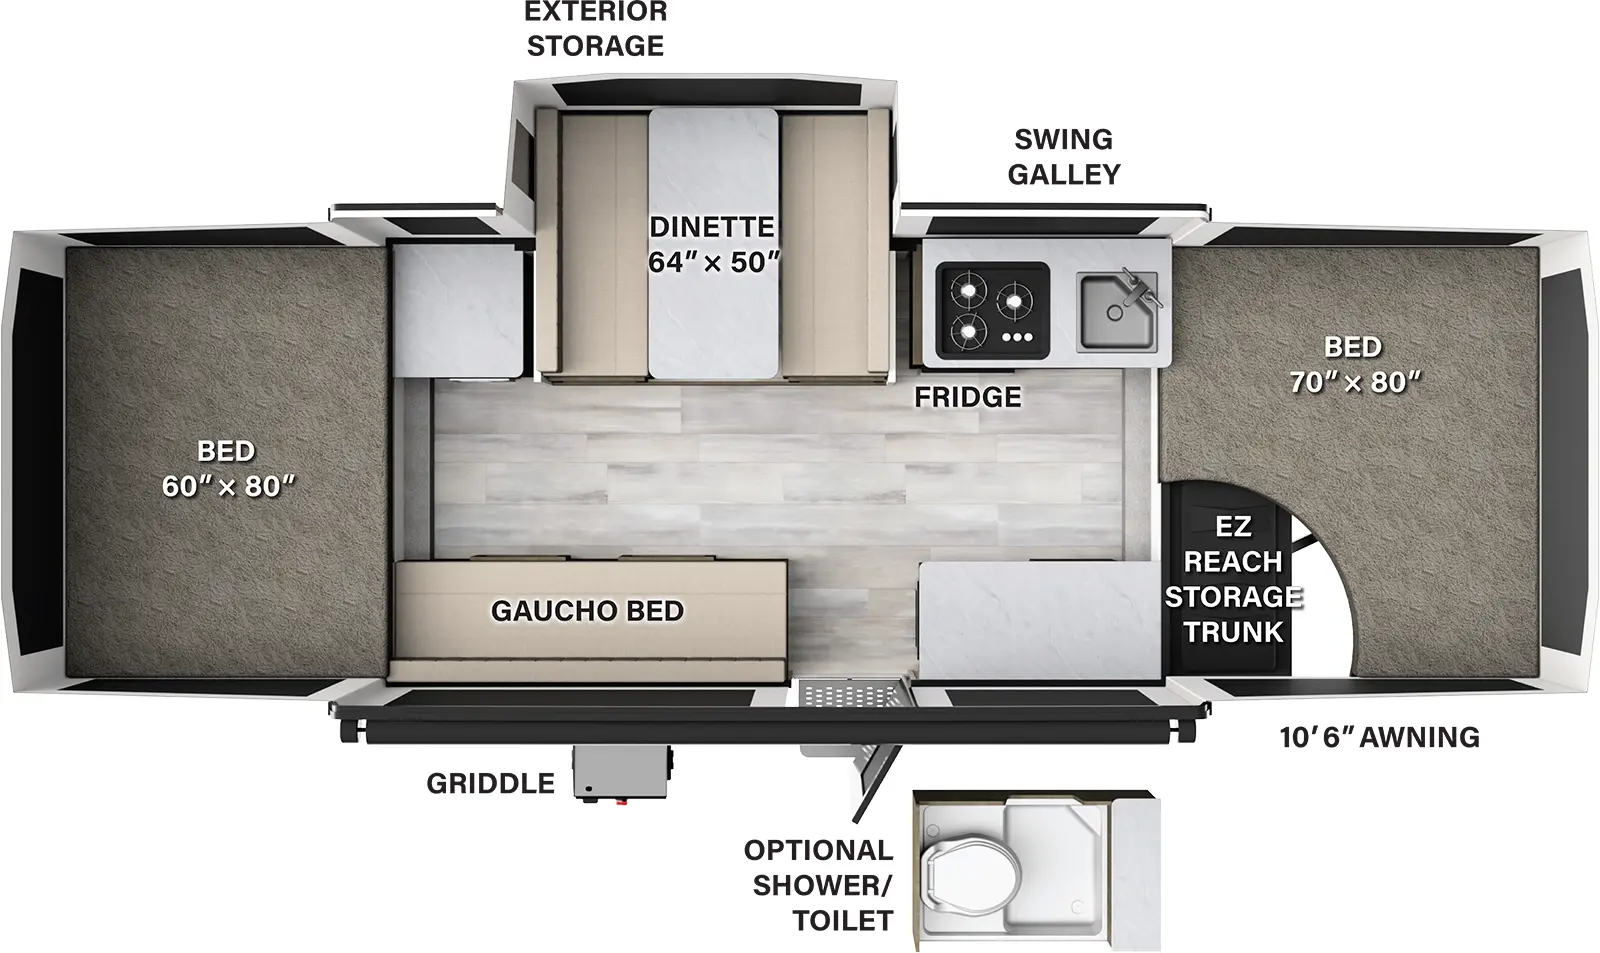 The 2318ESP has one slideout and one entry door. Exterior features a 10 foot 6 inch awning, griddle, exterior storage, and front EZ reach storage trunk. Interior layout front to back: front tent bed; off-door side swing galley with sink, refrigerator and cooktop, dinette slideout, and countertop; door side countertop, entry, and gaucho bed; rear tent bed. Optional shower/toilet available.